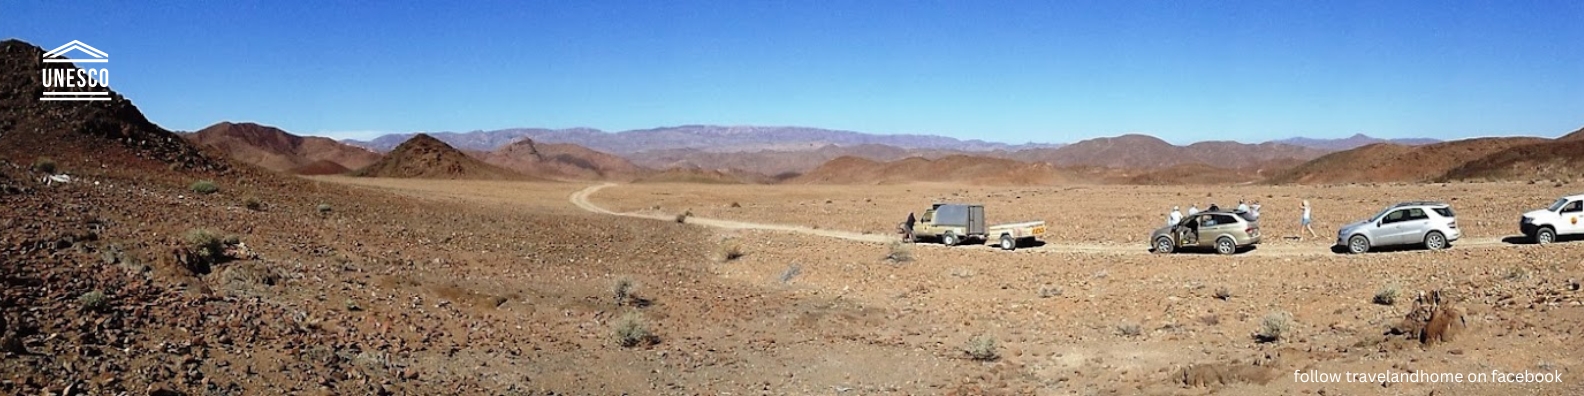 The Richtersveld, UNESCO World Heritage Site in South Africa